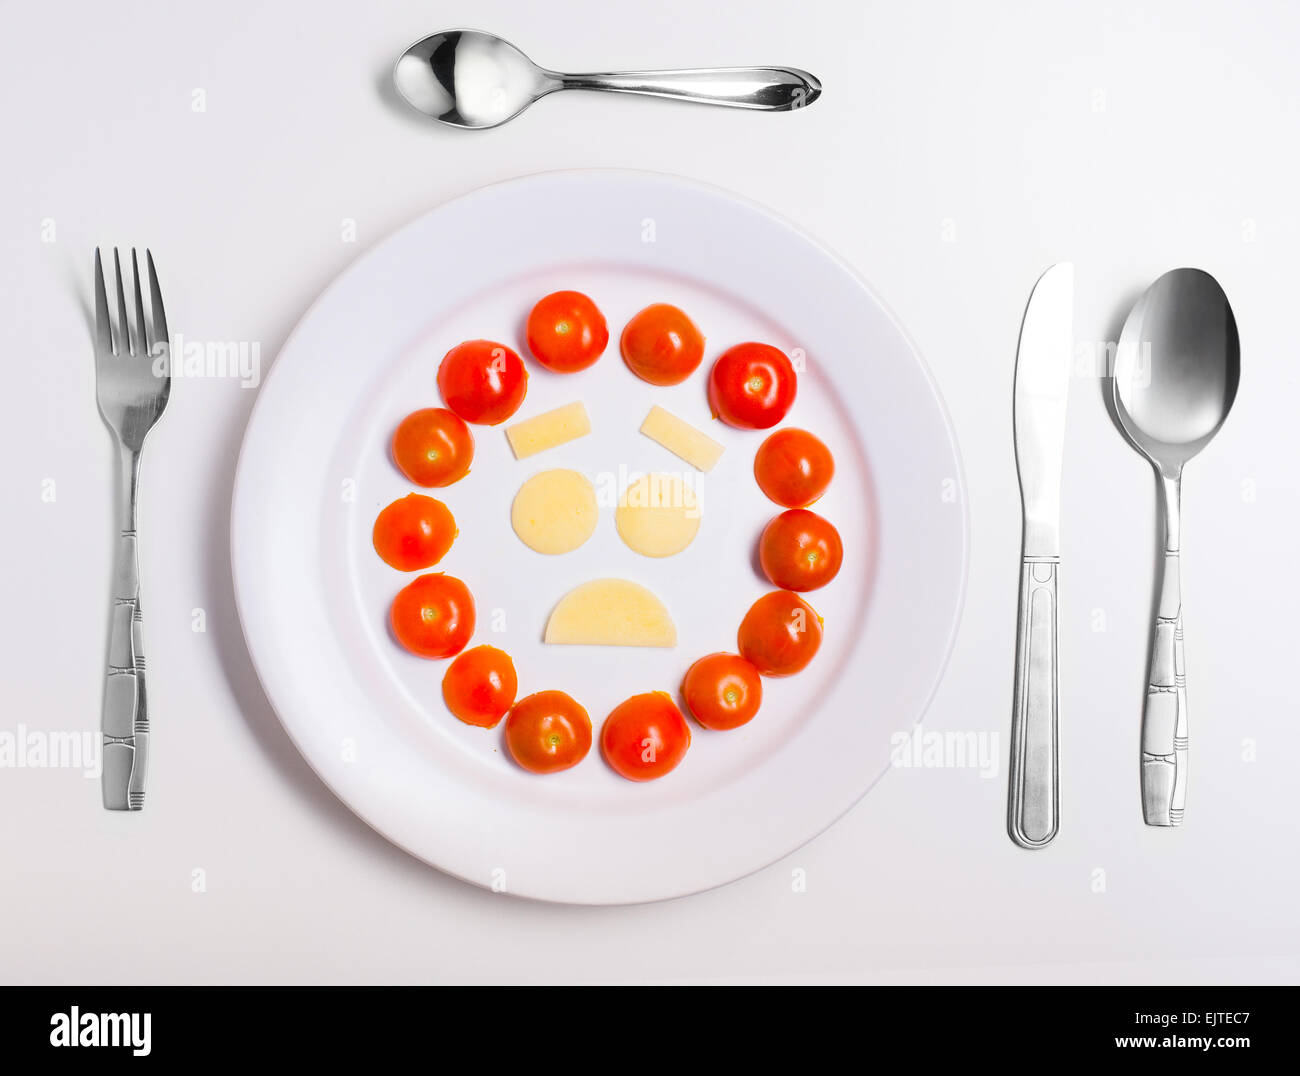 disappointed emoticon food, made from cheese and tomatoes, on a plate with cutlery, isolated Stock Photo